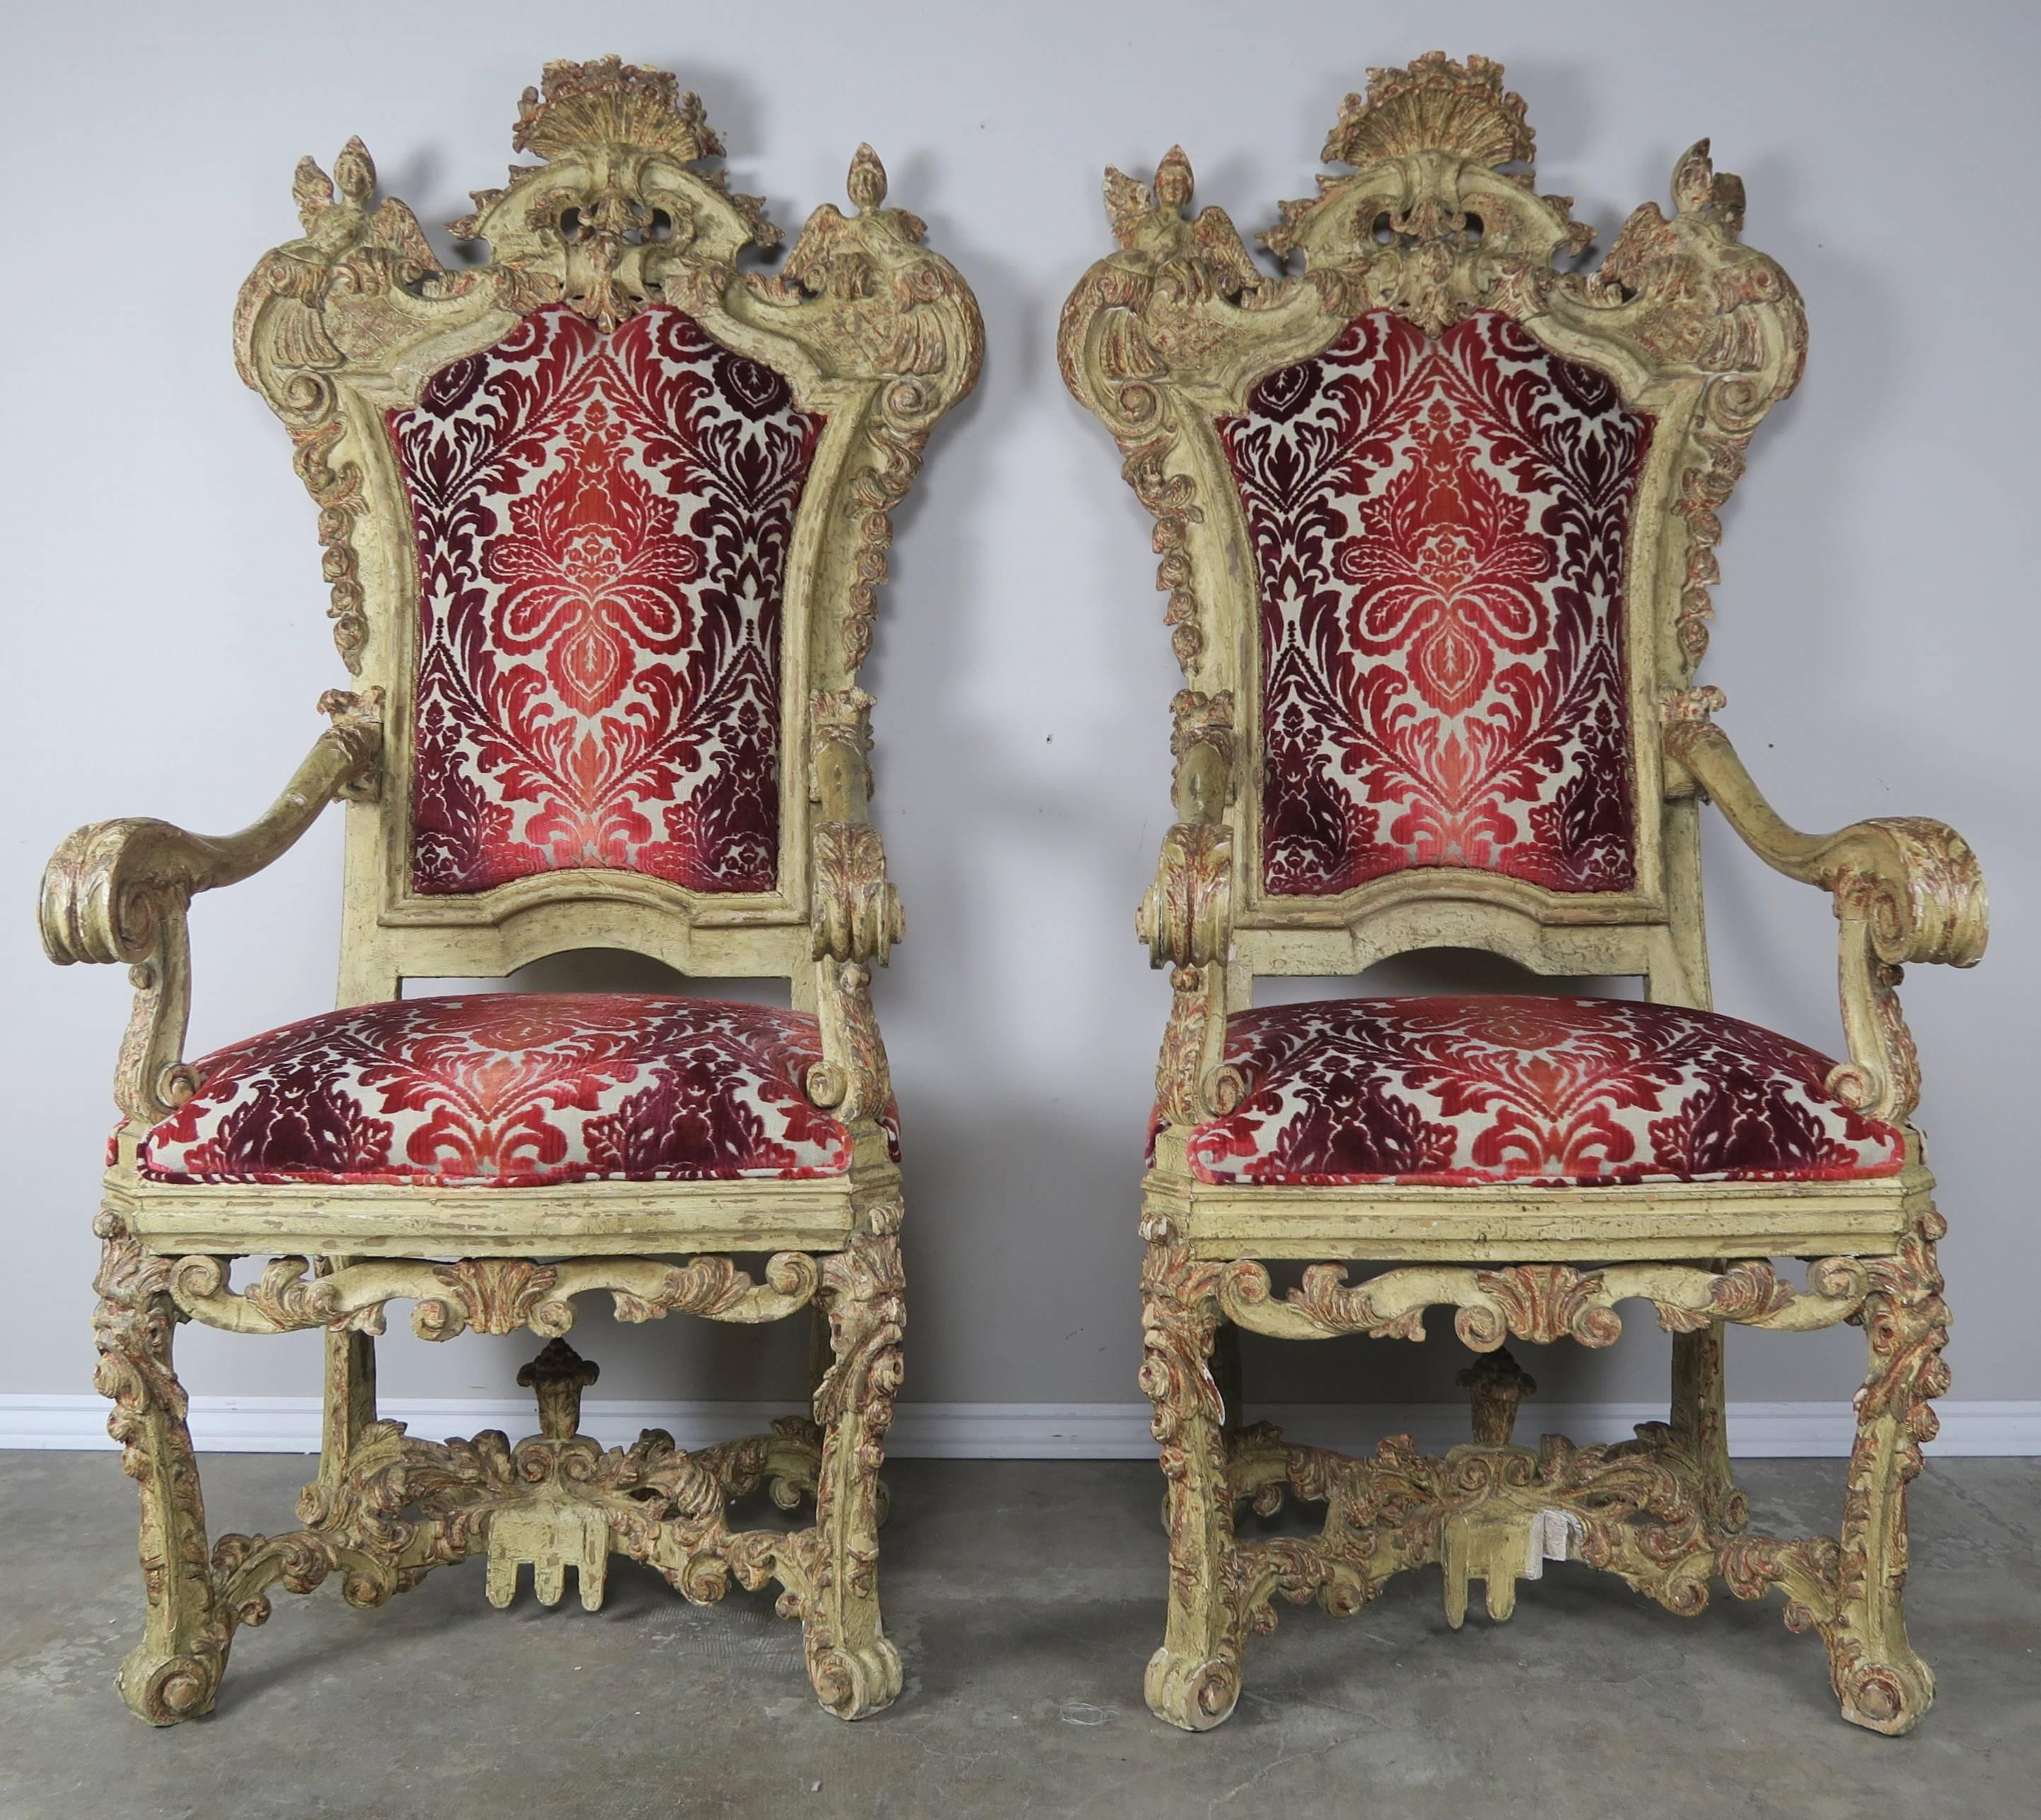 Pair of 18th century carved painted Venetian throne style armchairs. There are wonderful details carved into almost every inch of these remarkable pair of chairs. Notice the pair of winged cherubs or angels guarding the patron of the chair. The